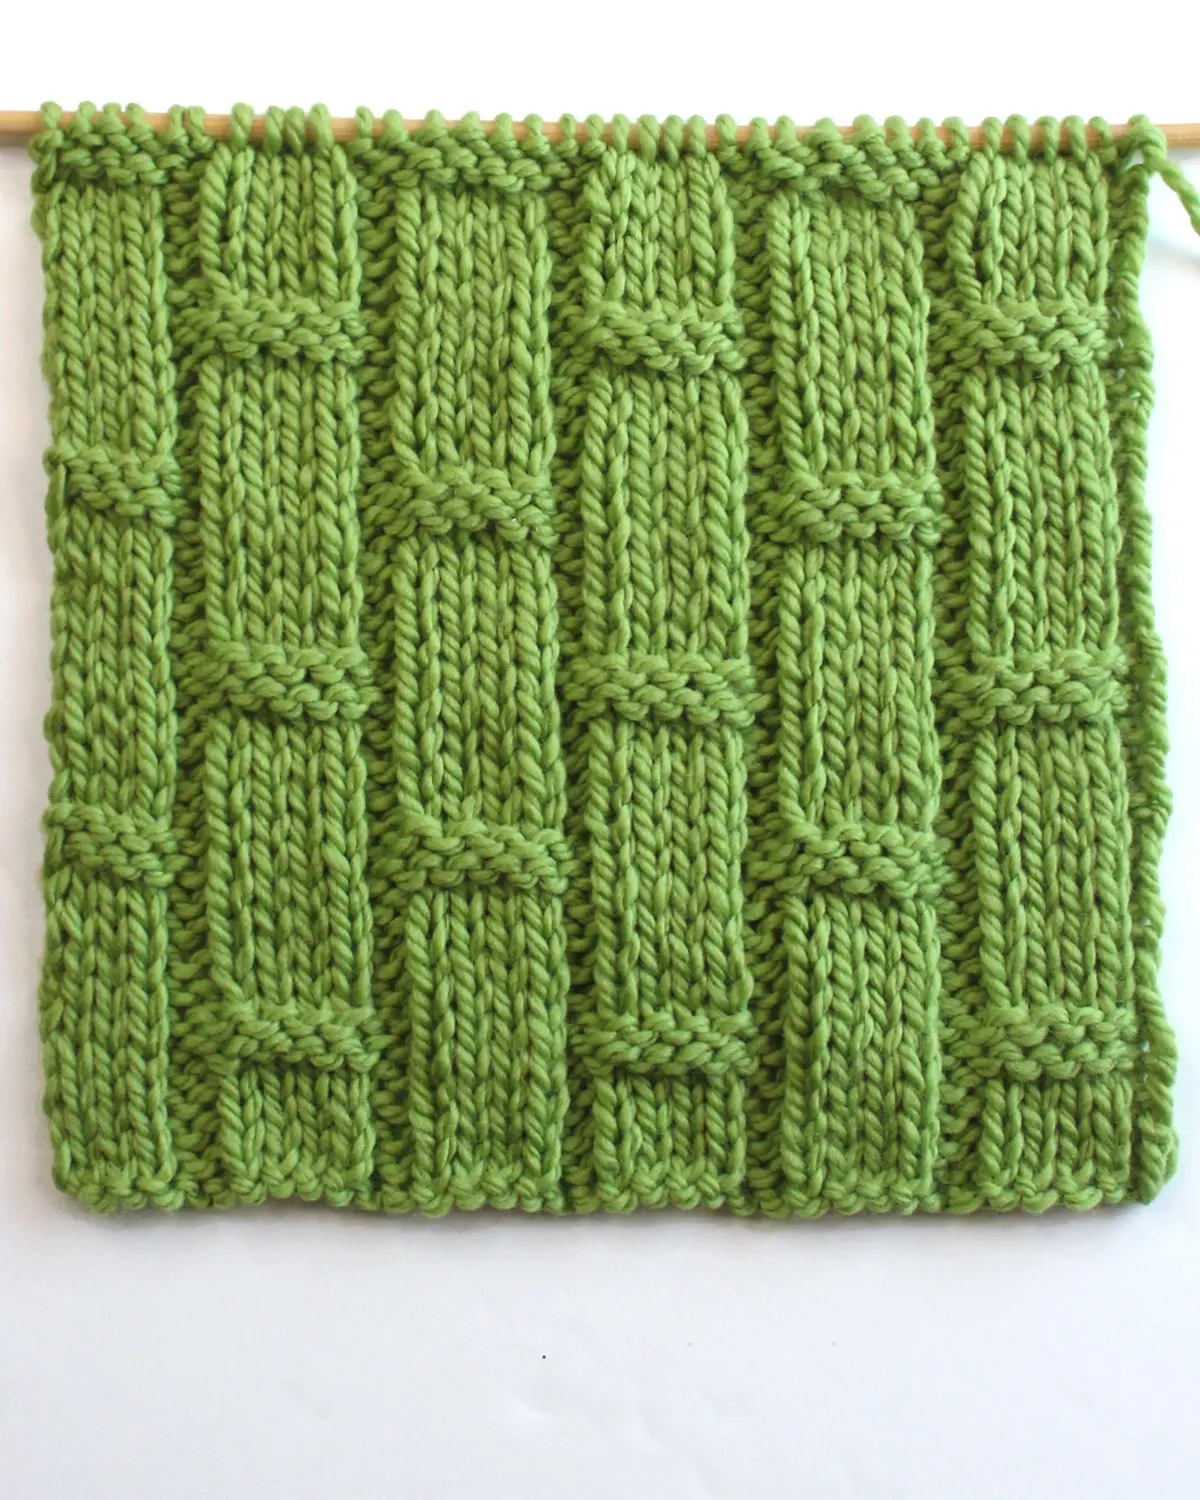 Bamboo Ribbing texture knitted on bamboo needle with green colored yarn.